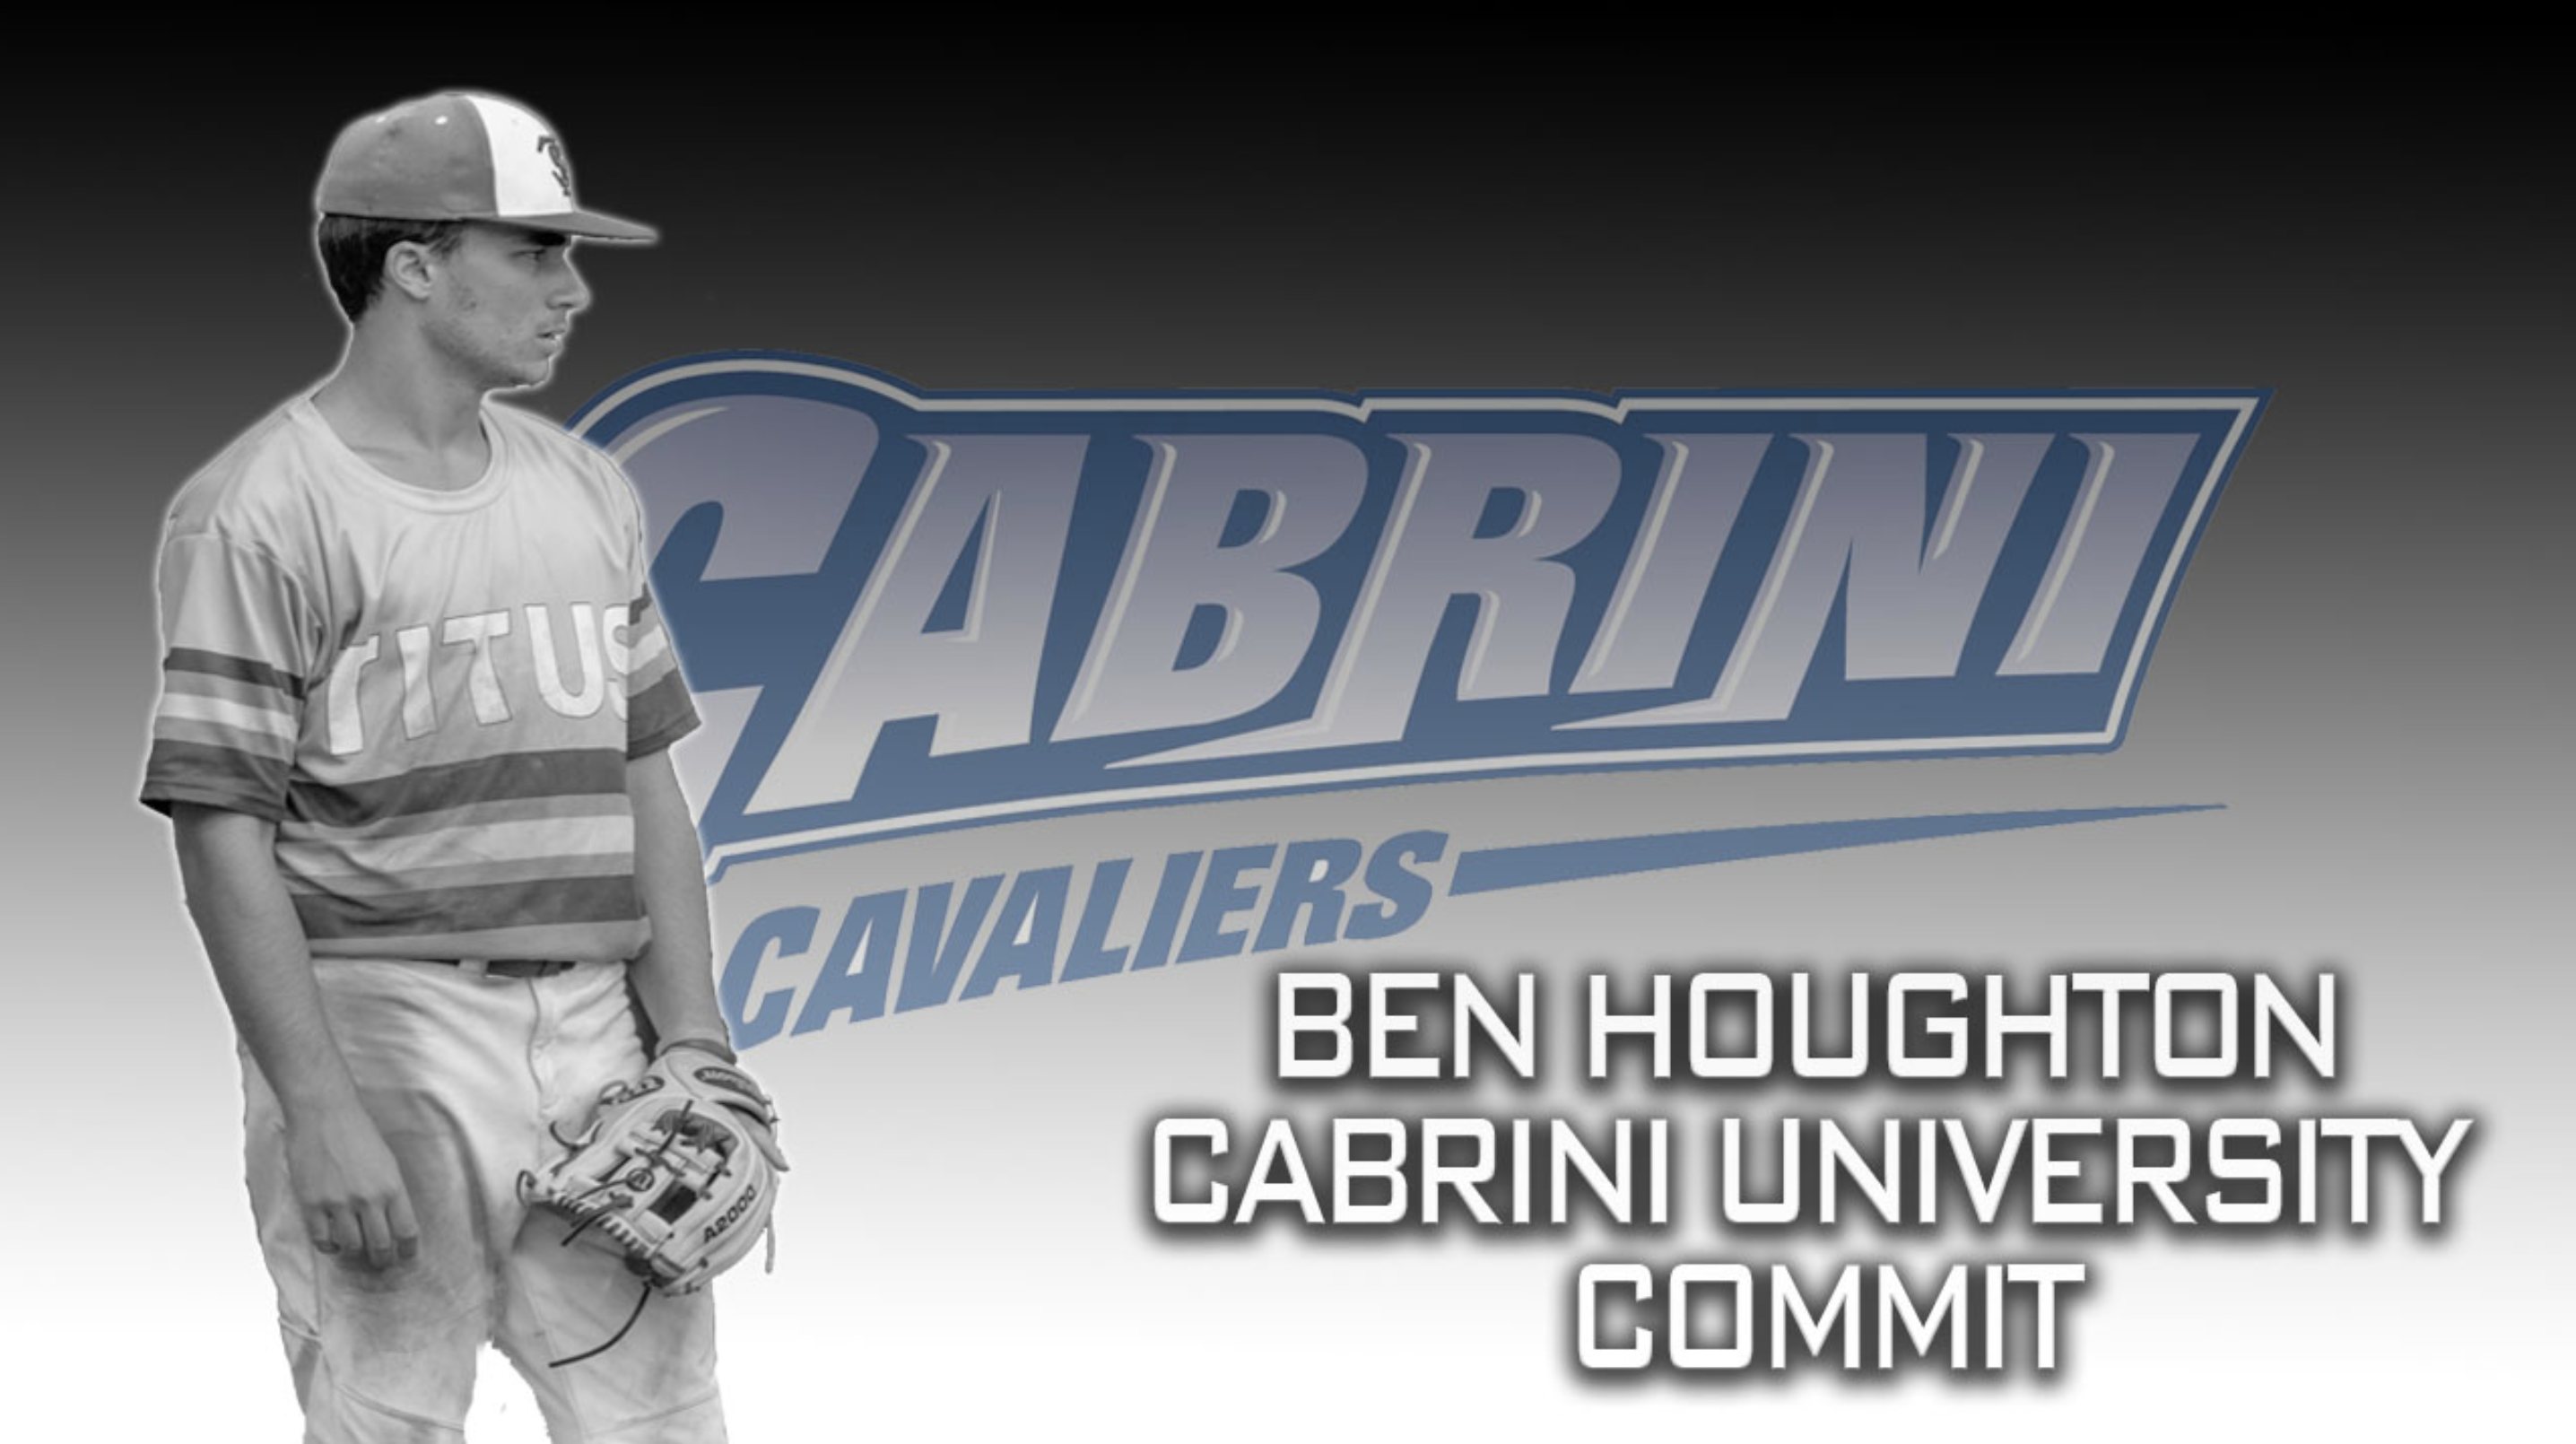 Ben Houghton’s Story – Committed to Cabrini University